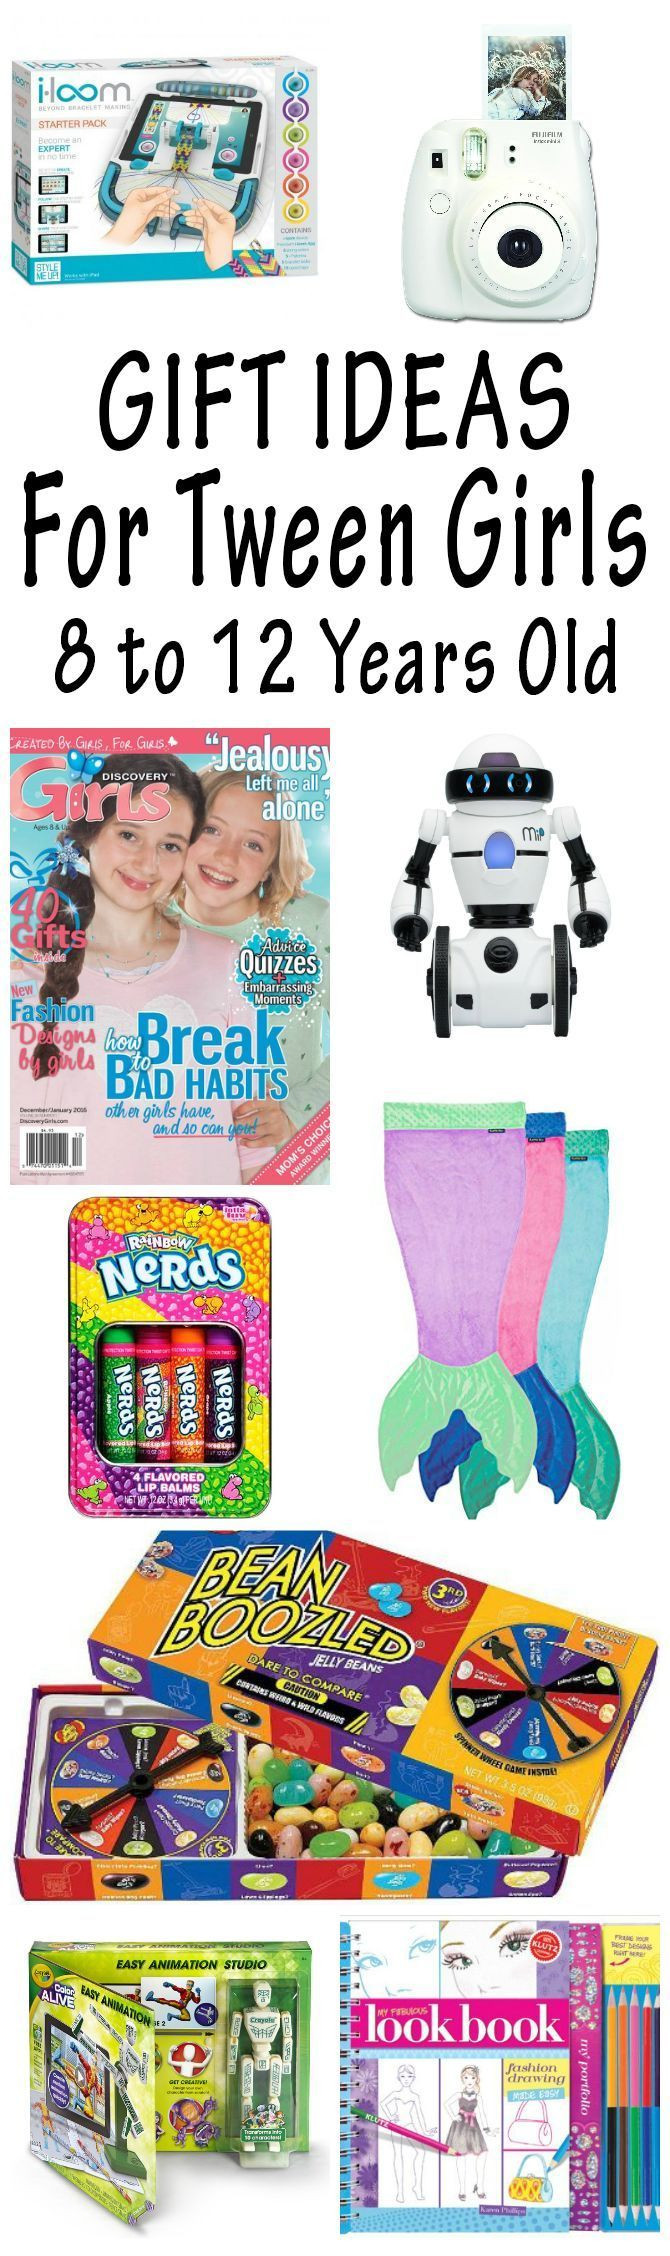 Girls Gift Ideas Age 12
 24 best Gift Ideas Girls Age 8 to 12 images on Pinterest